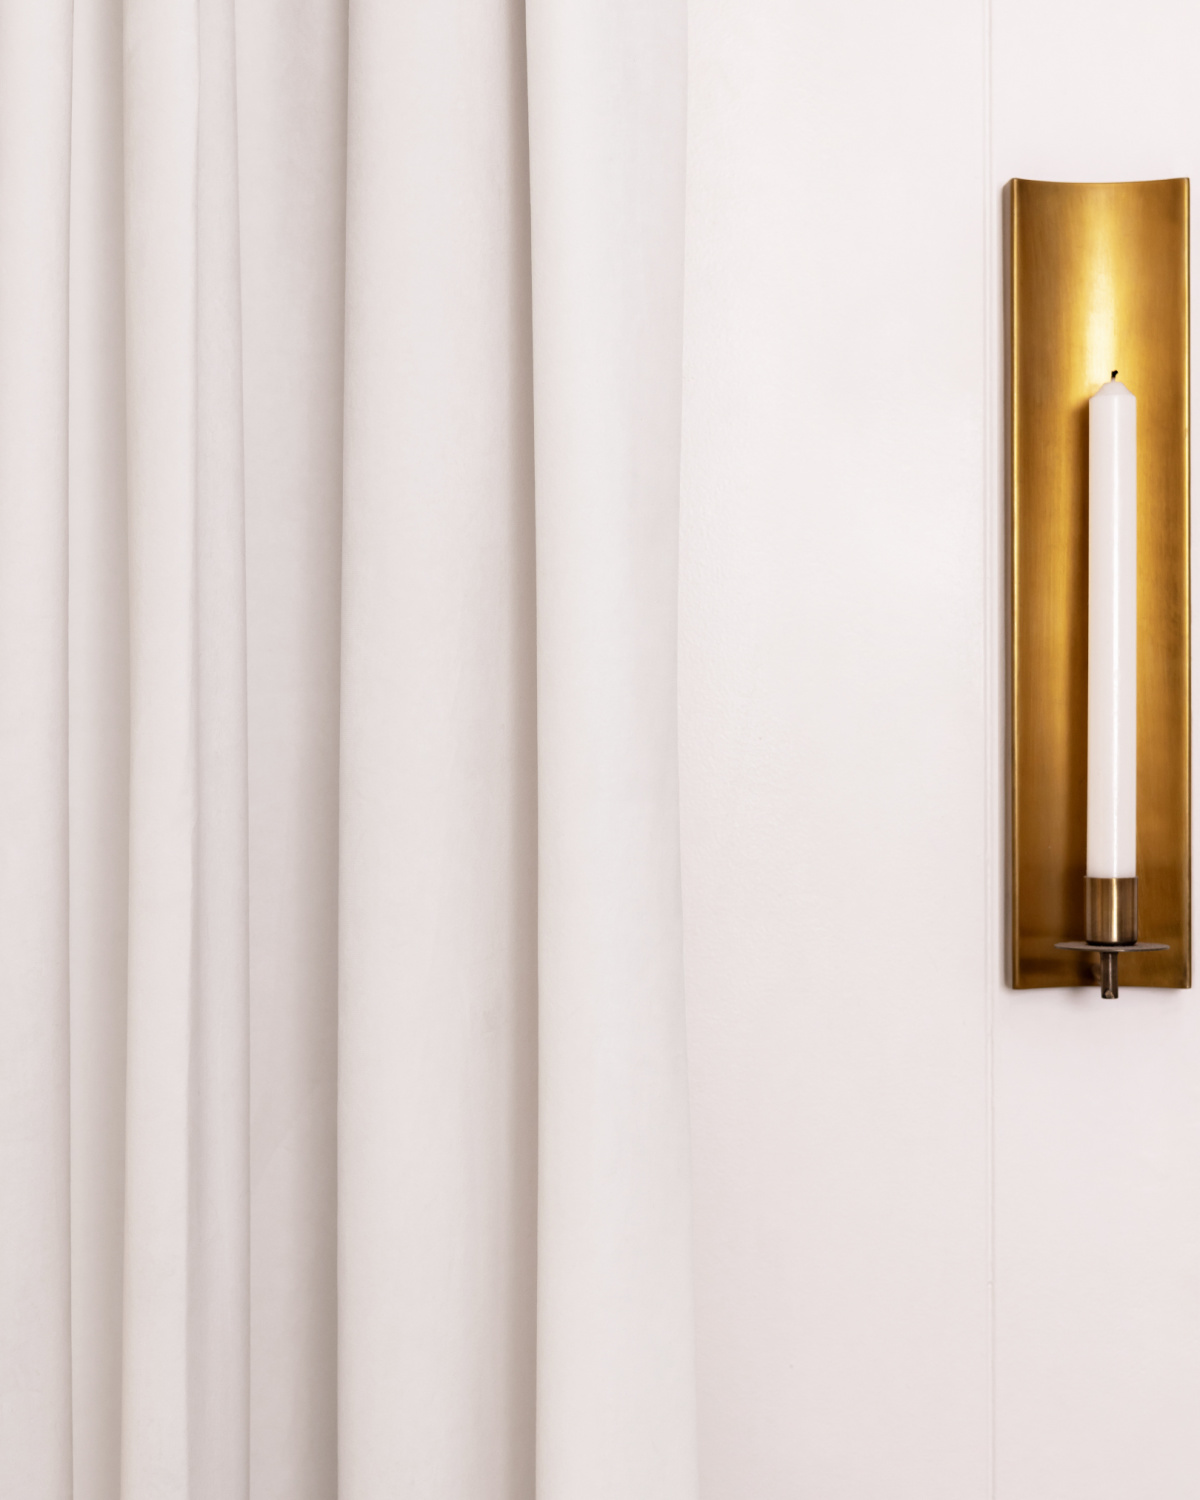 Benjamin Moore Simply White on walls with brass candle sconce.